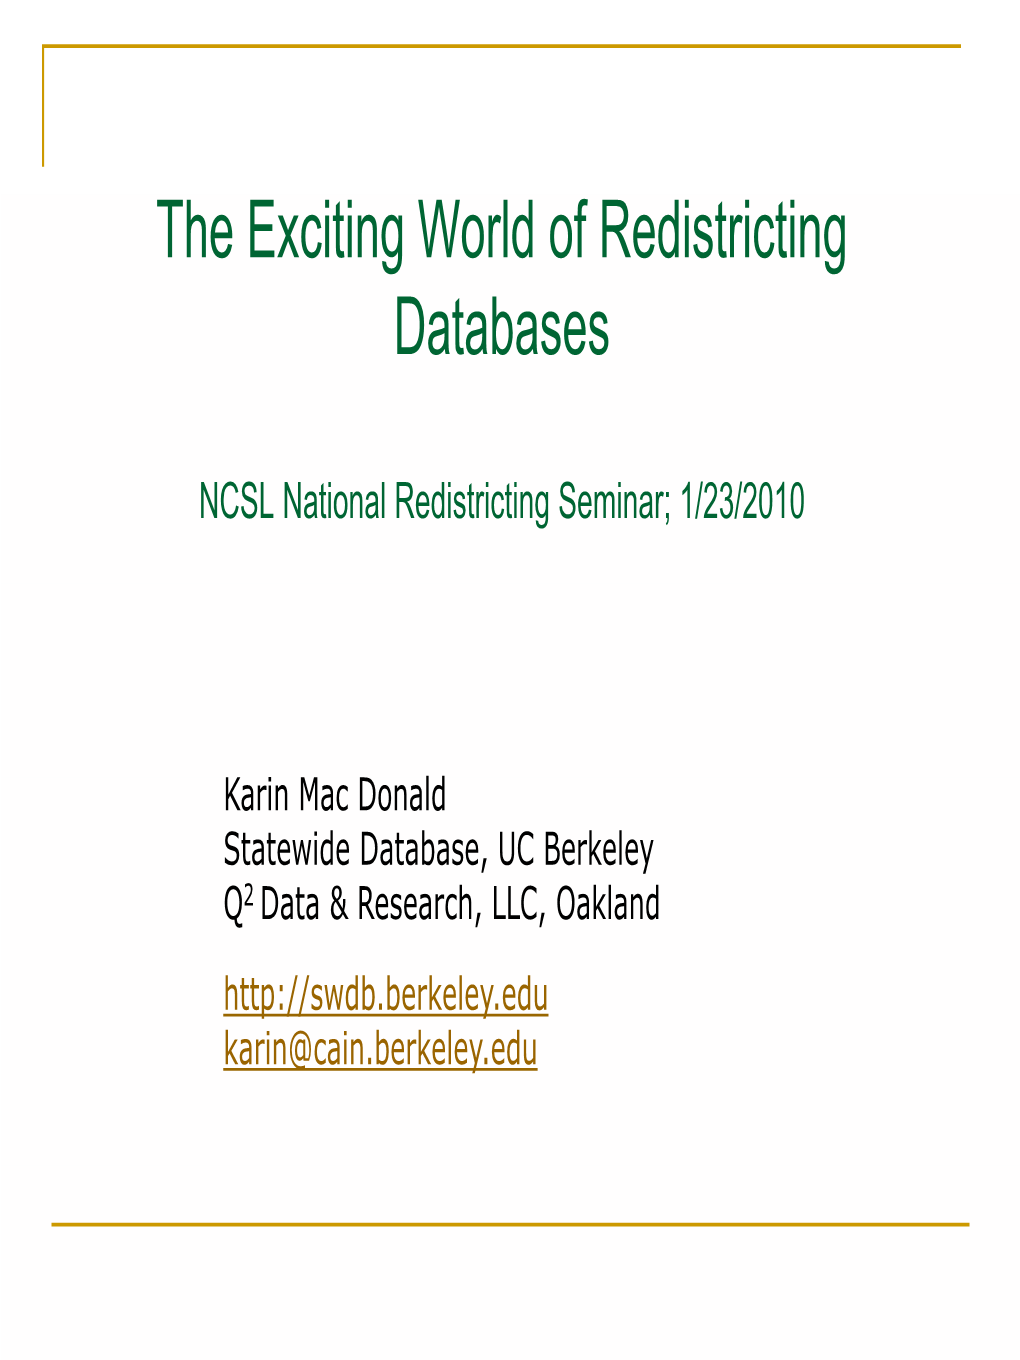 The Exciting World of Redistricting Databases